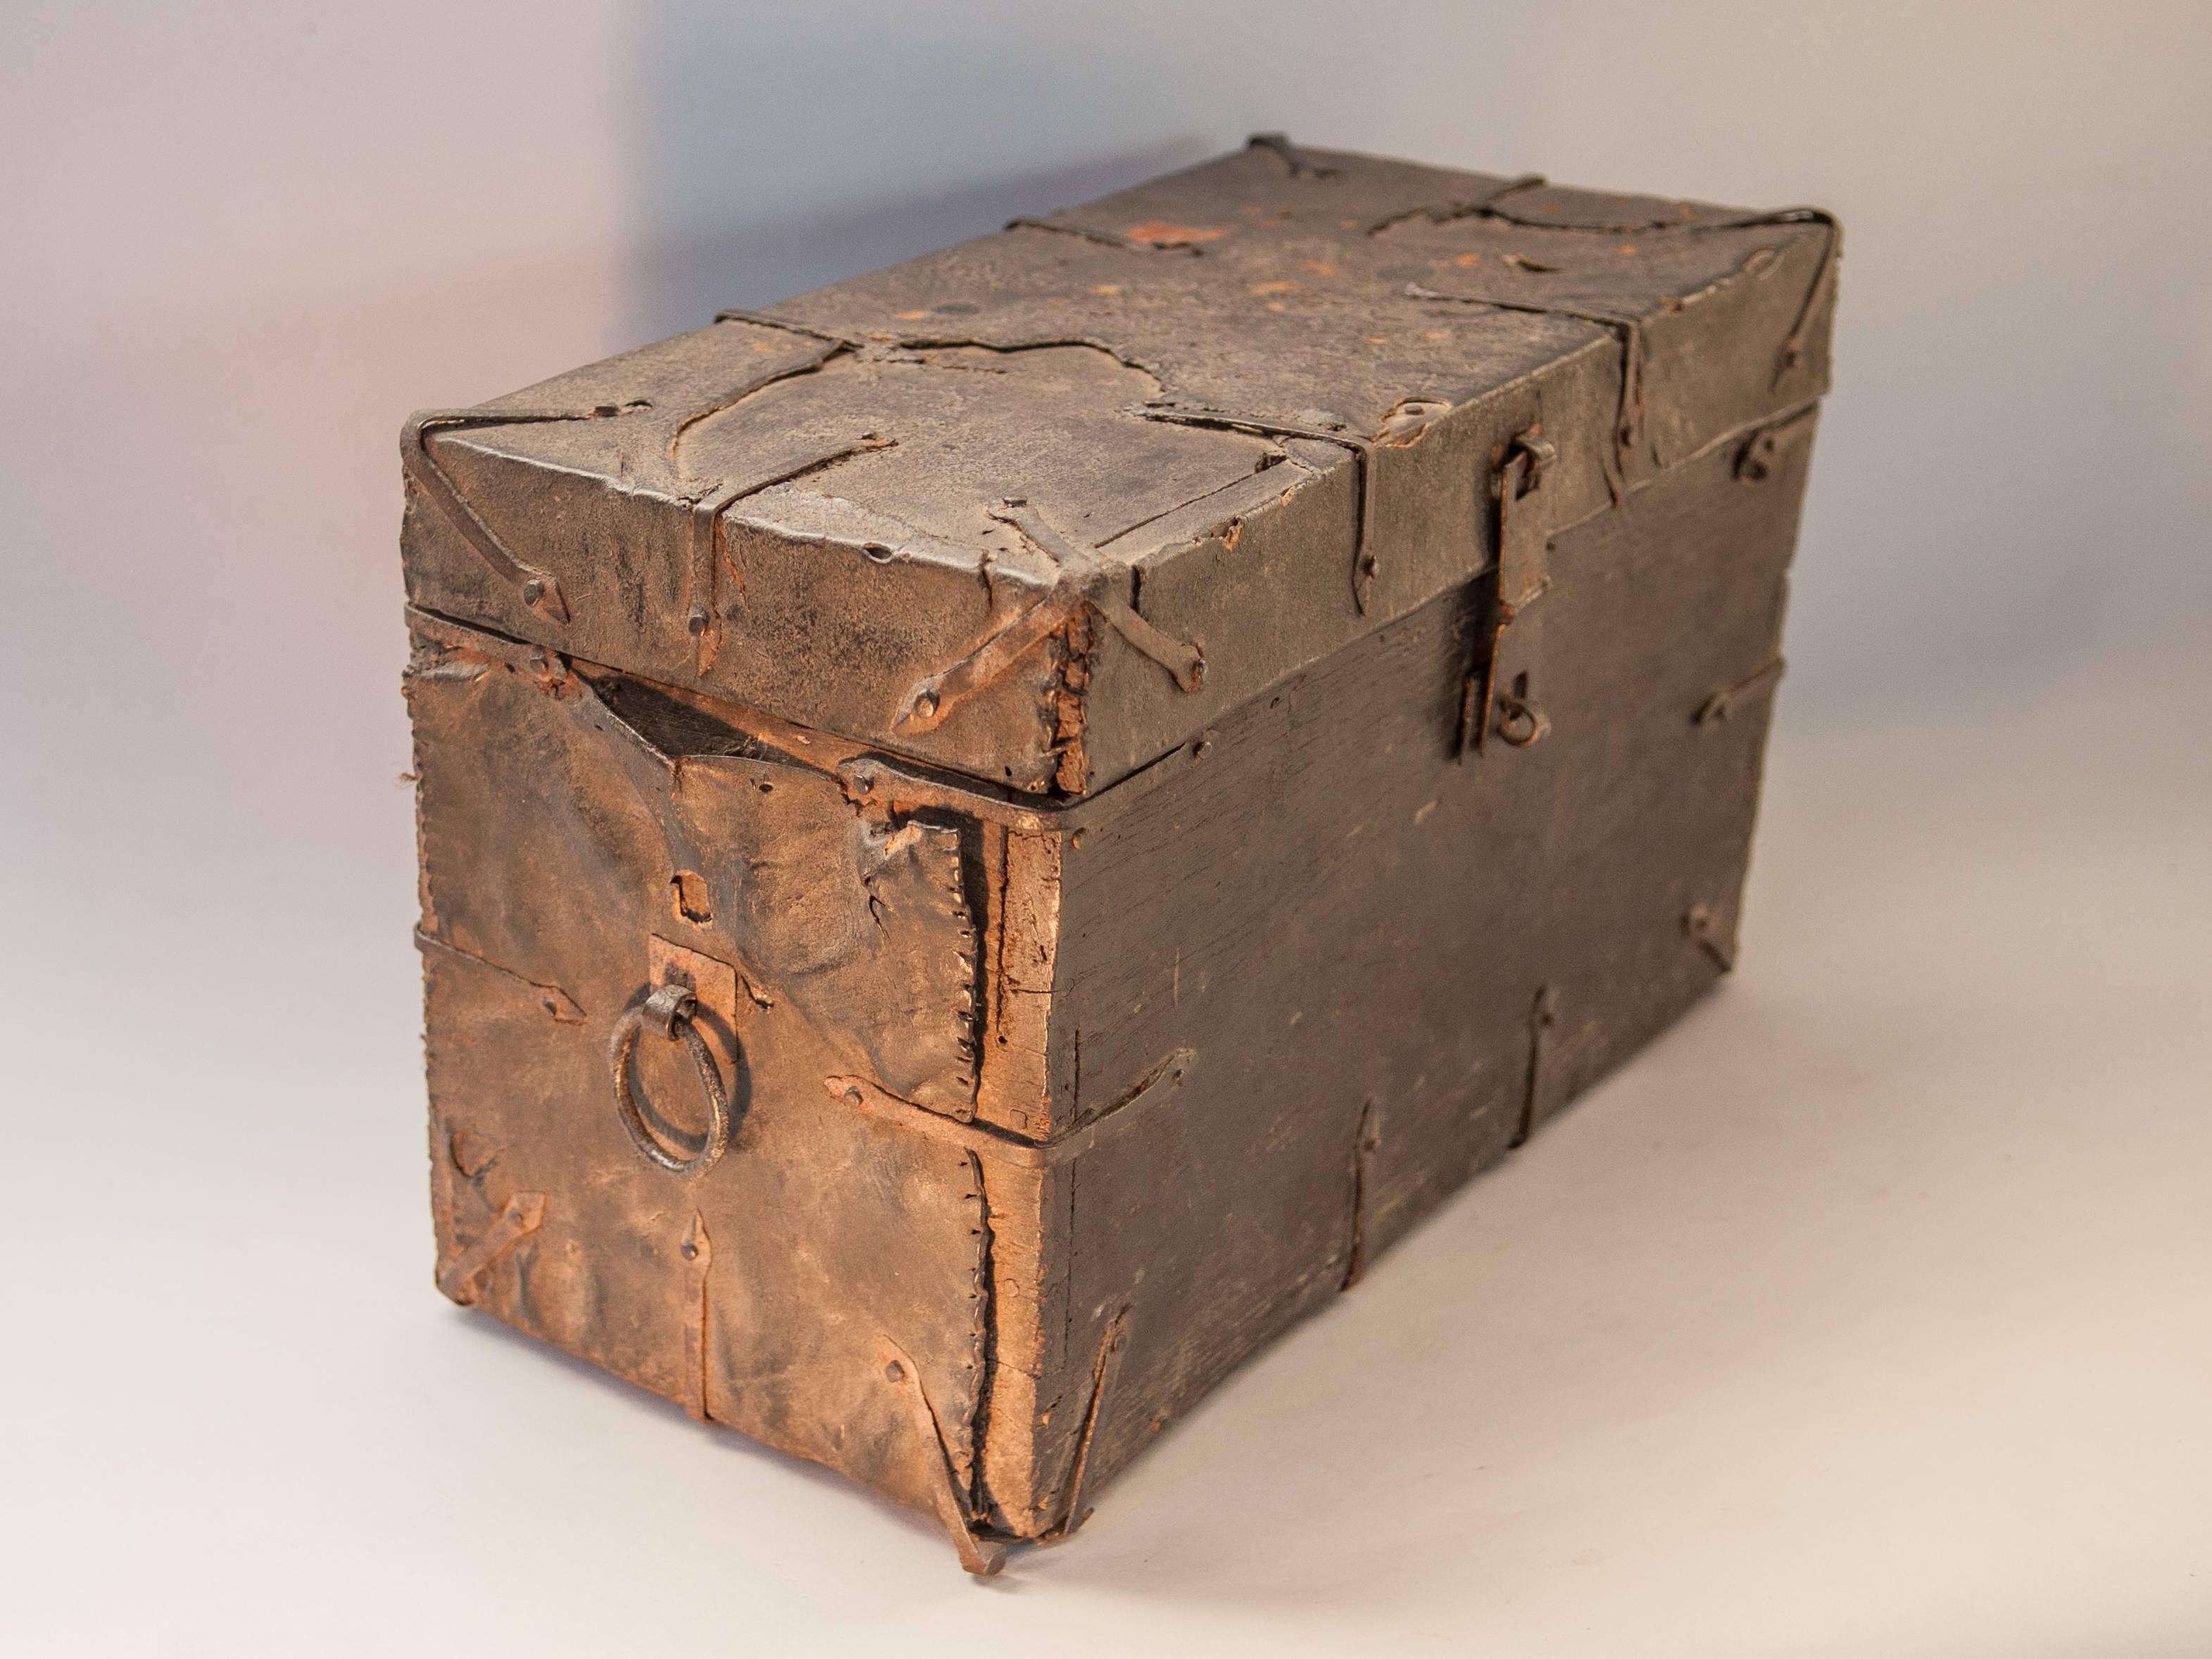 Vintage Wooden and Leather Chest from Tibet, Early-Mid 20th Century.
This rustic wooden chest would have been used to store and transport household items and valuables. It is comprised of wood, covered with leather on all sides except the front.